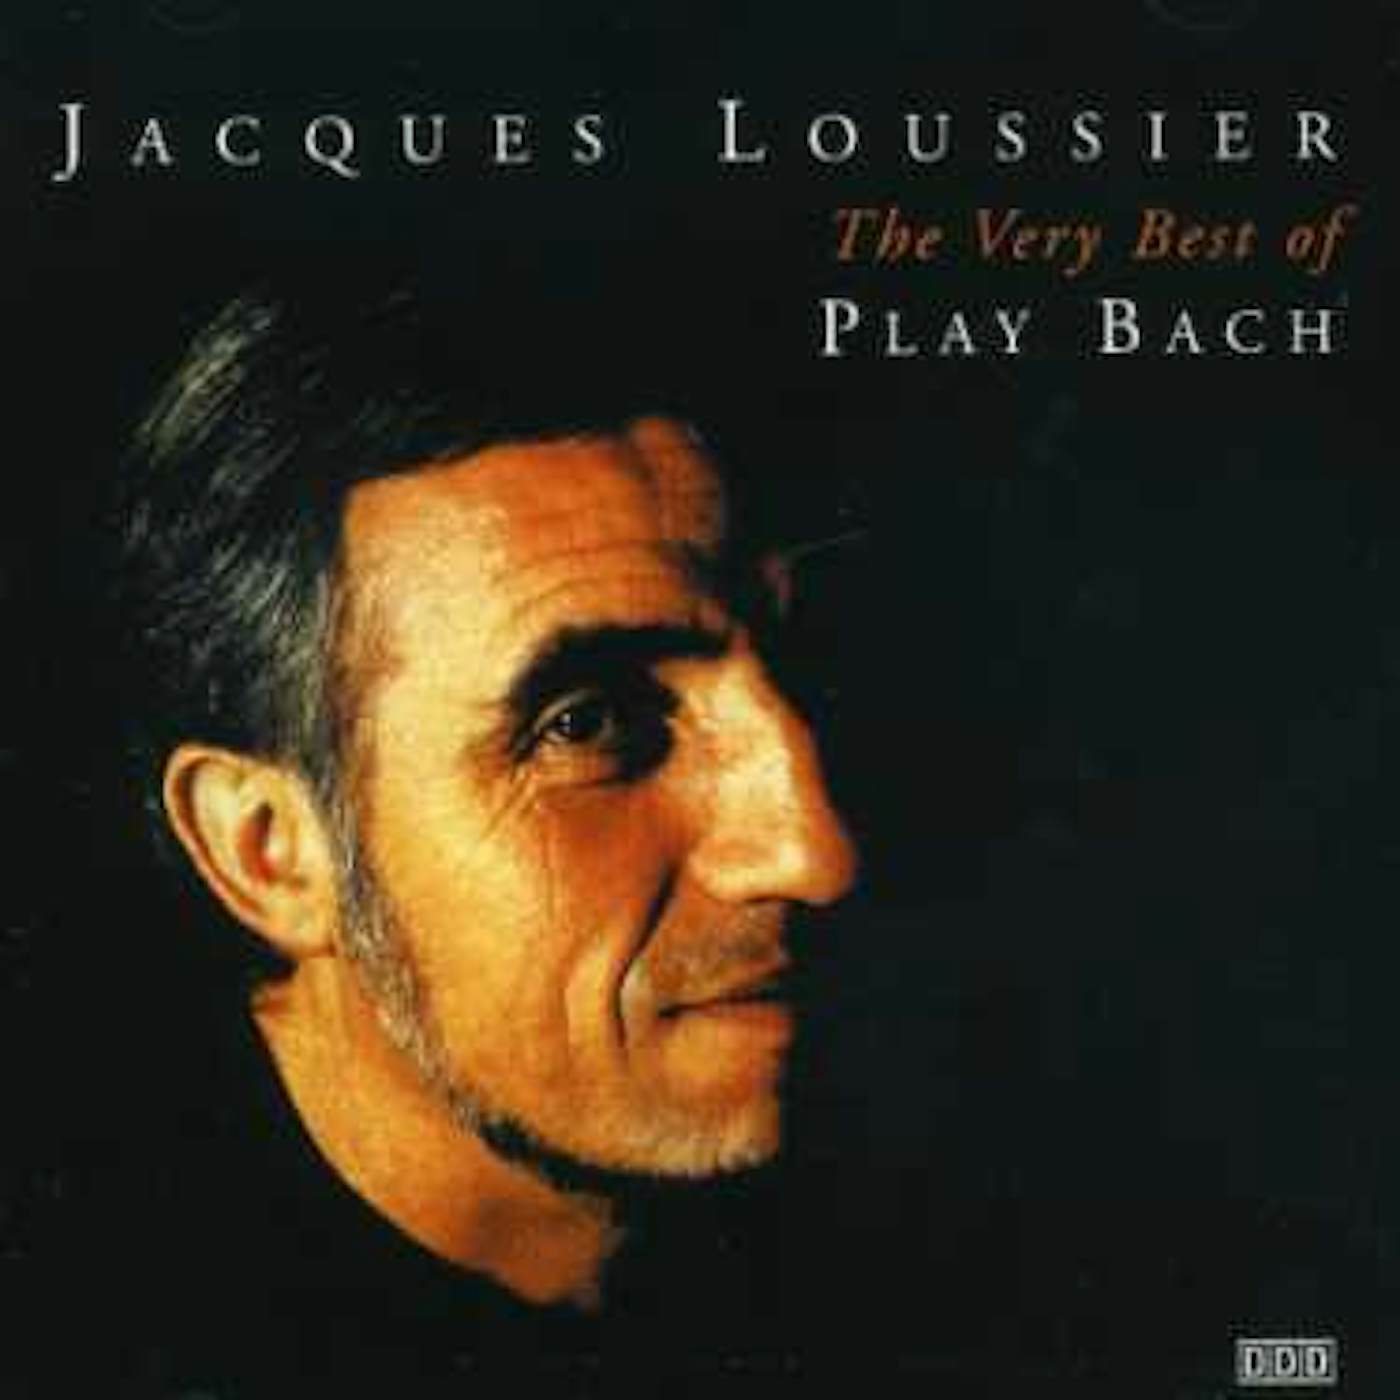 Jacques Loussier VERY BEST OF PLAY BACH CD